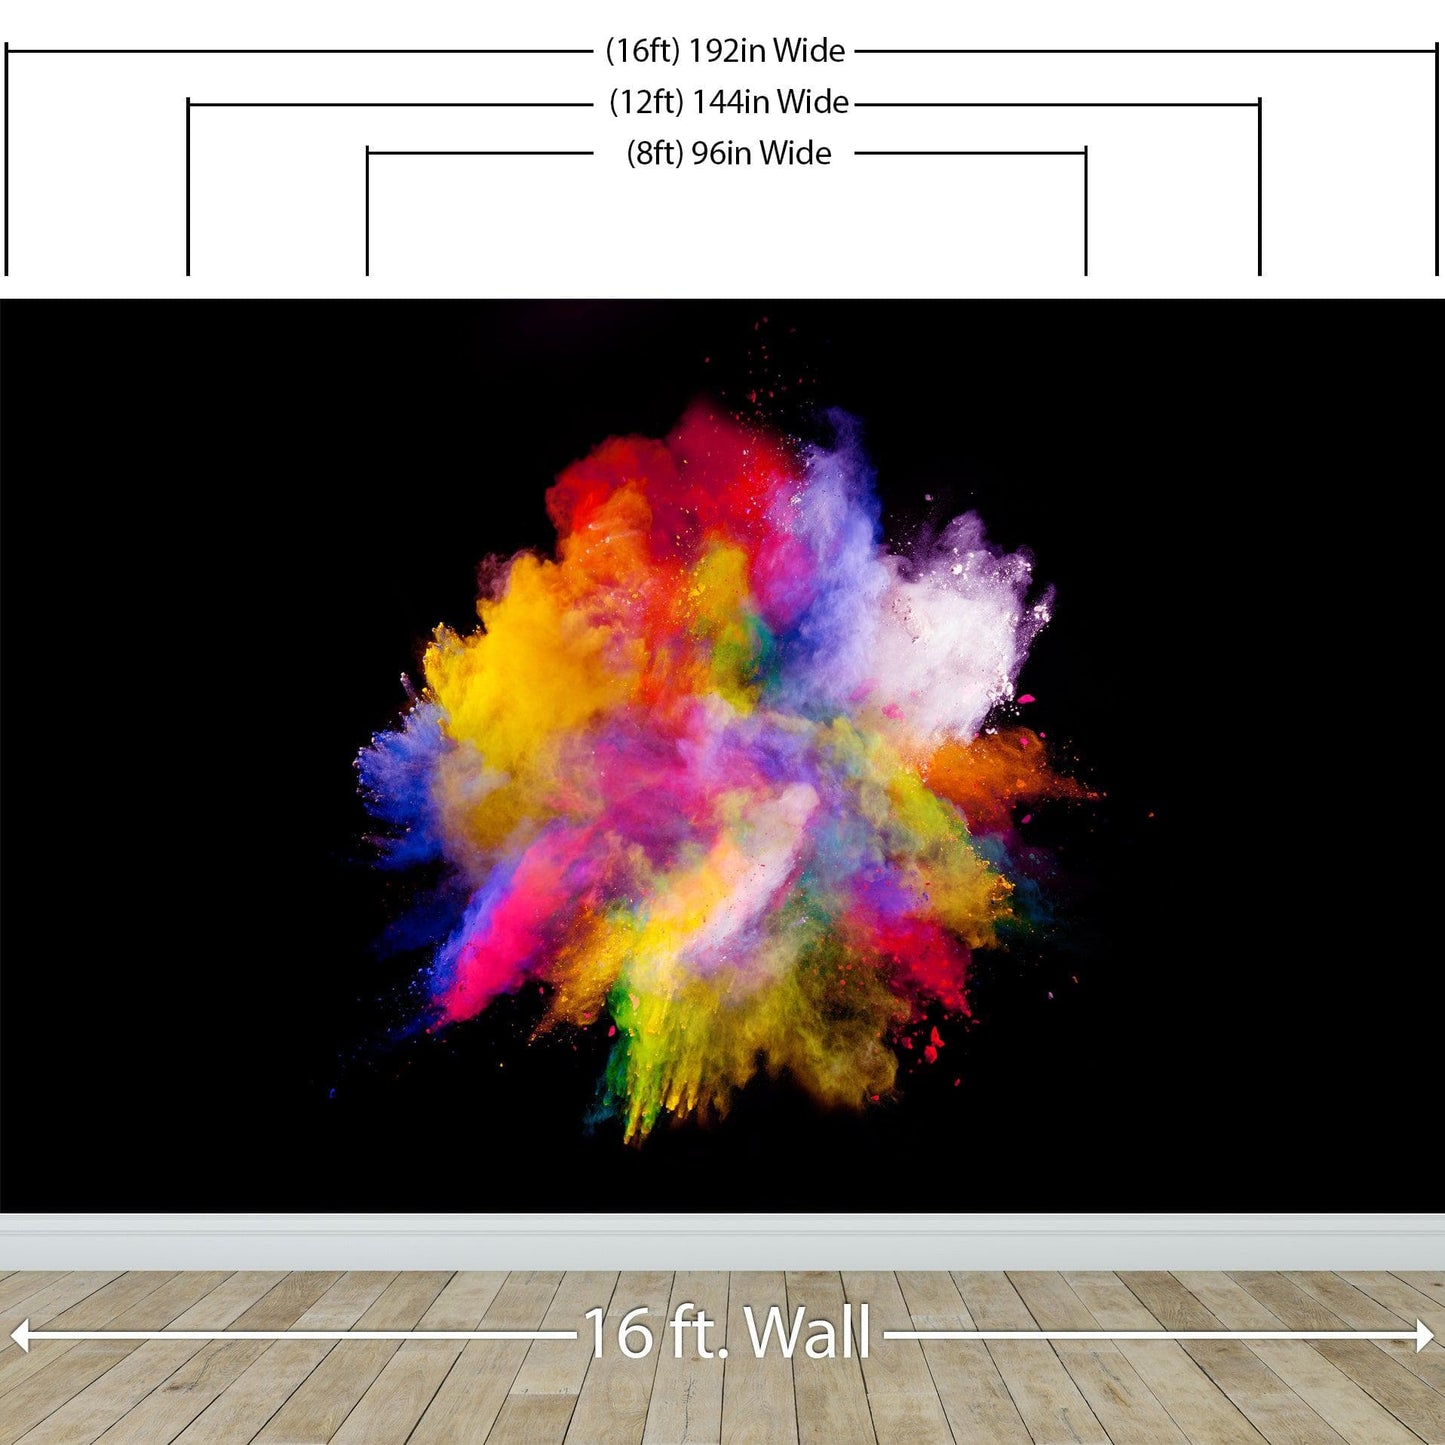 Wall Mural Decal Sticker Burst of Color Powder Abstract #6006